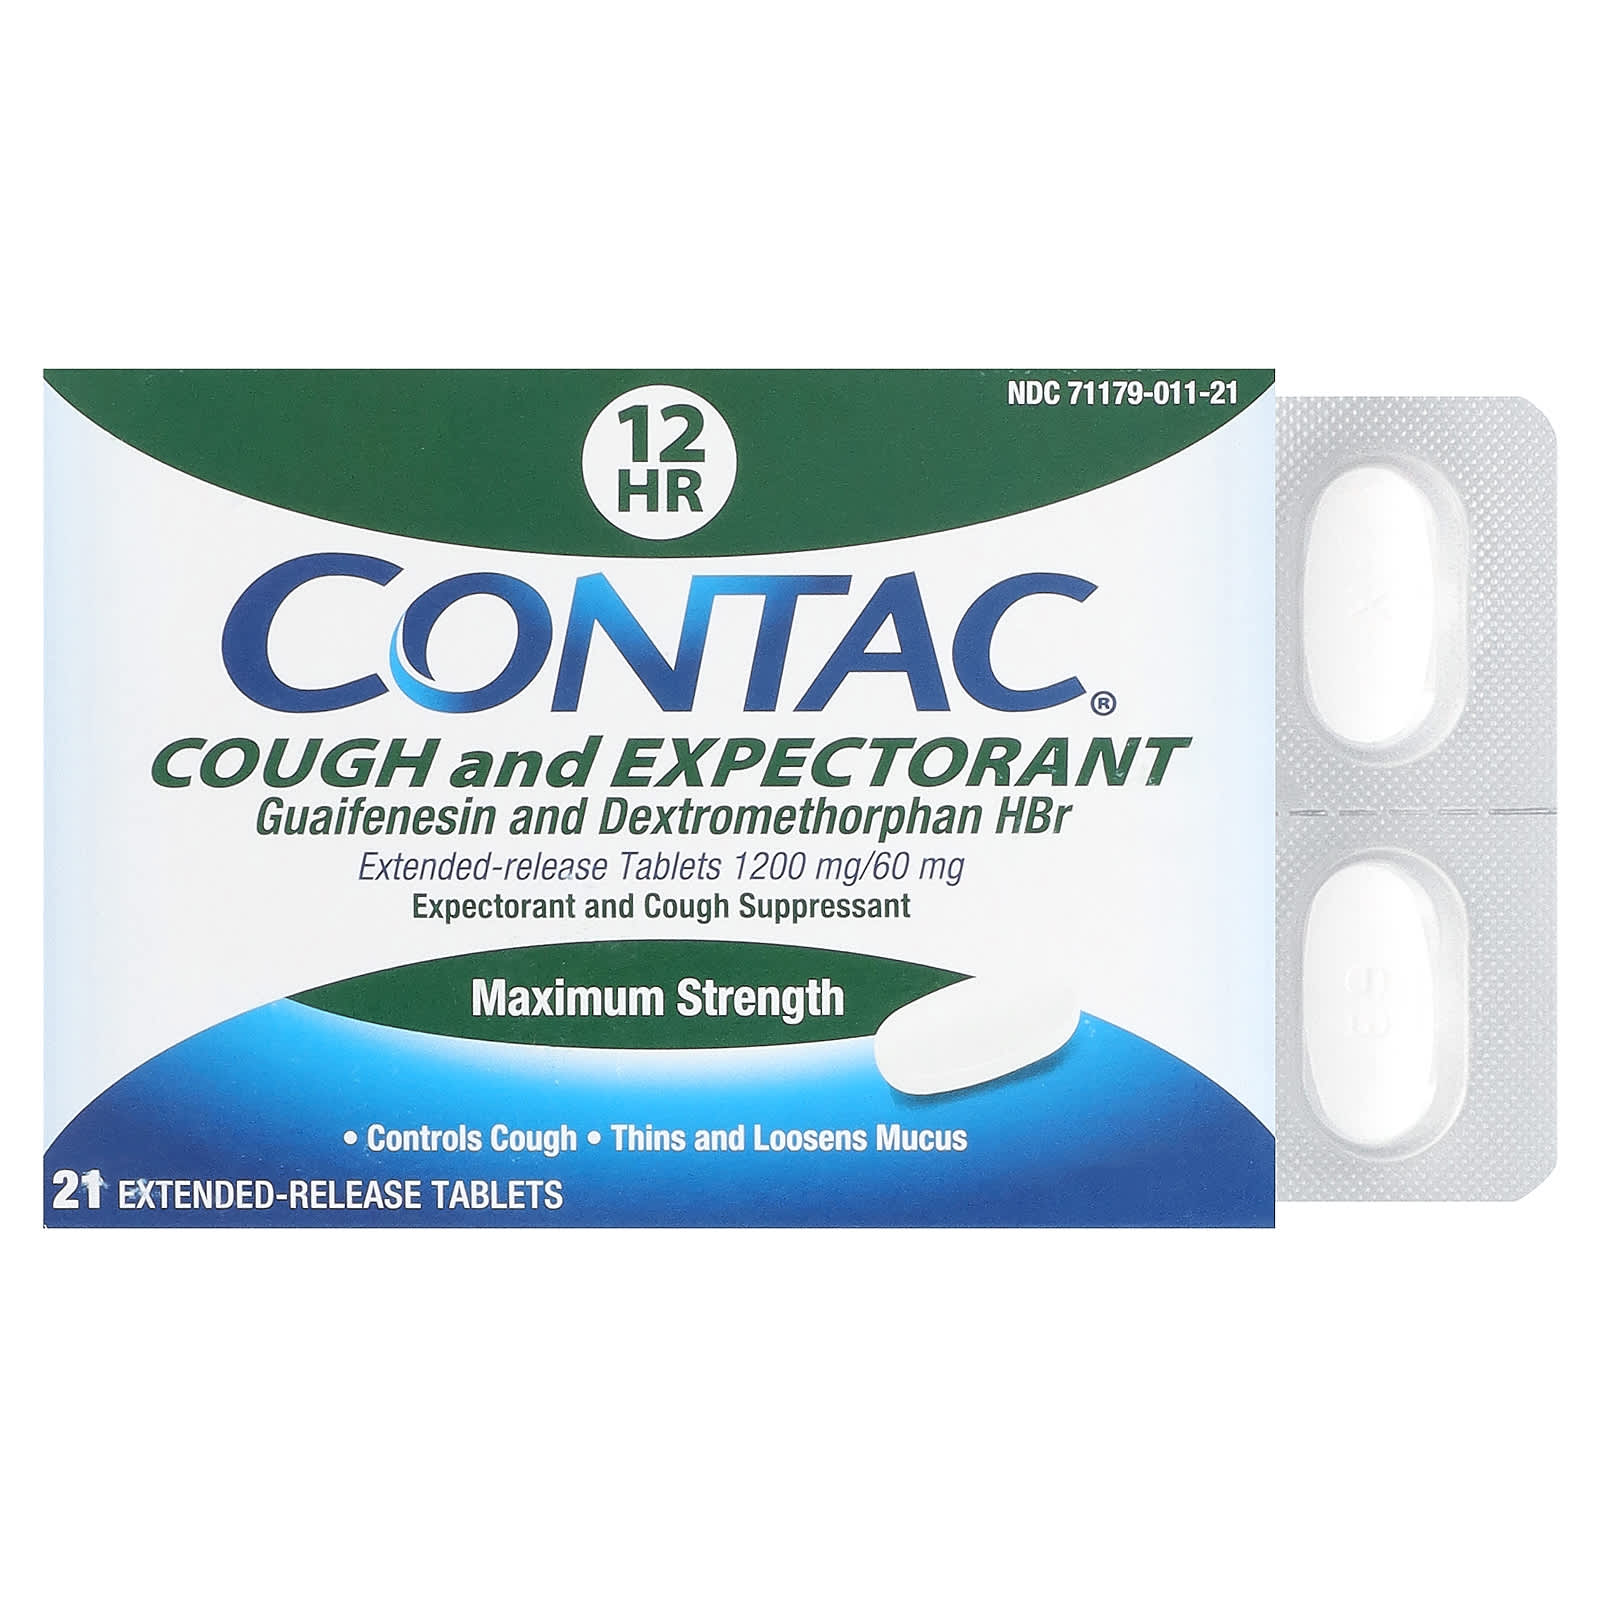 Cough and Expectorant